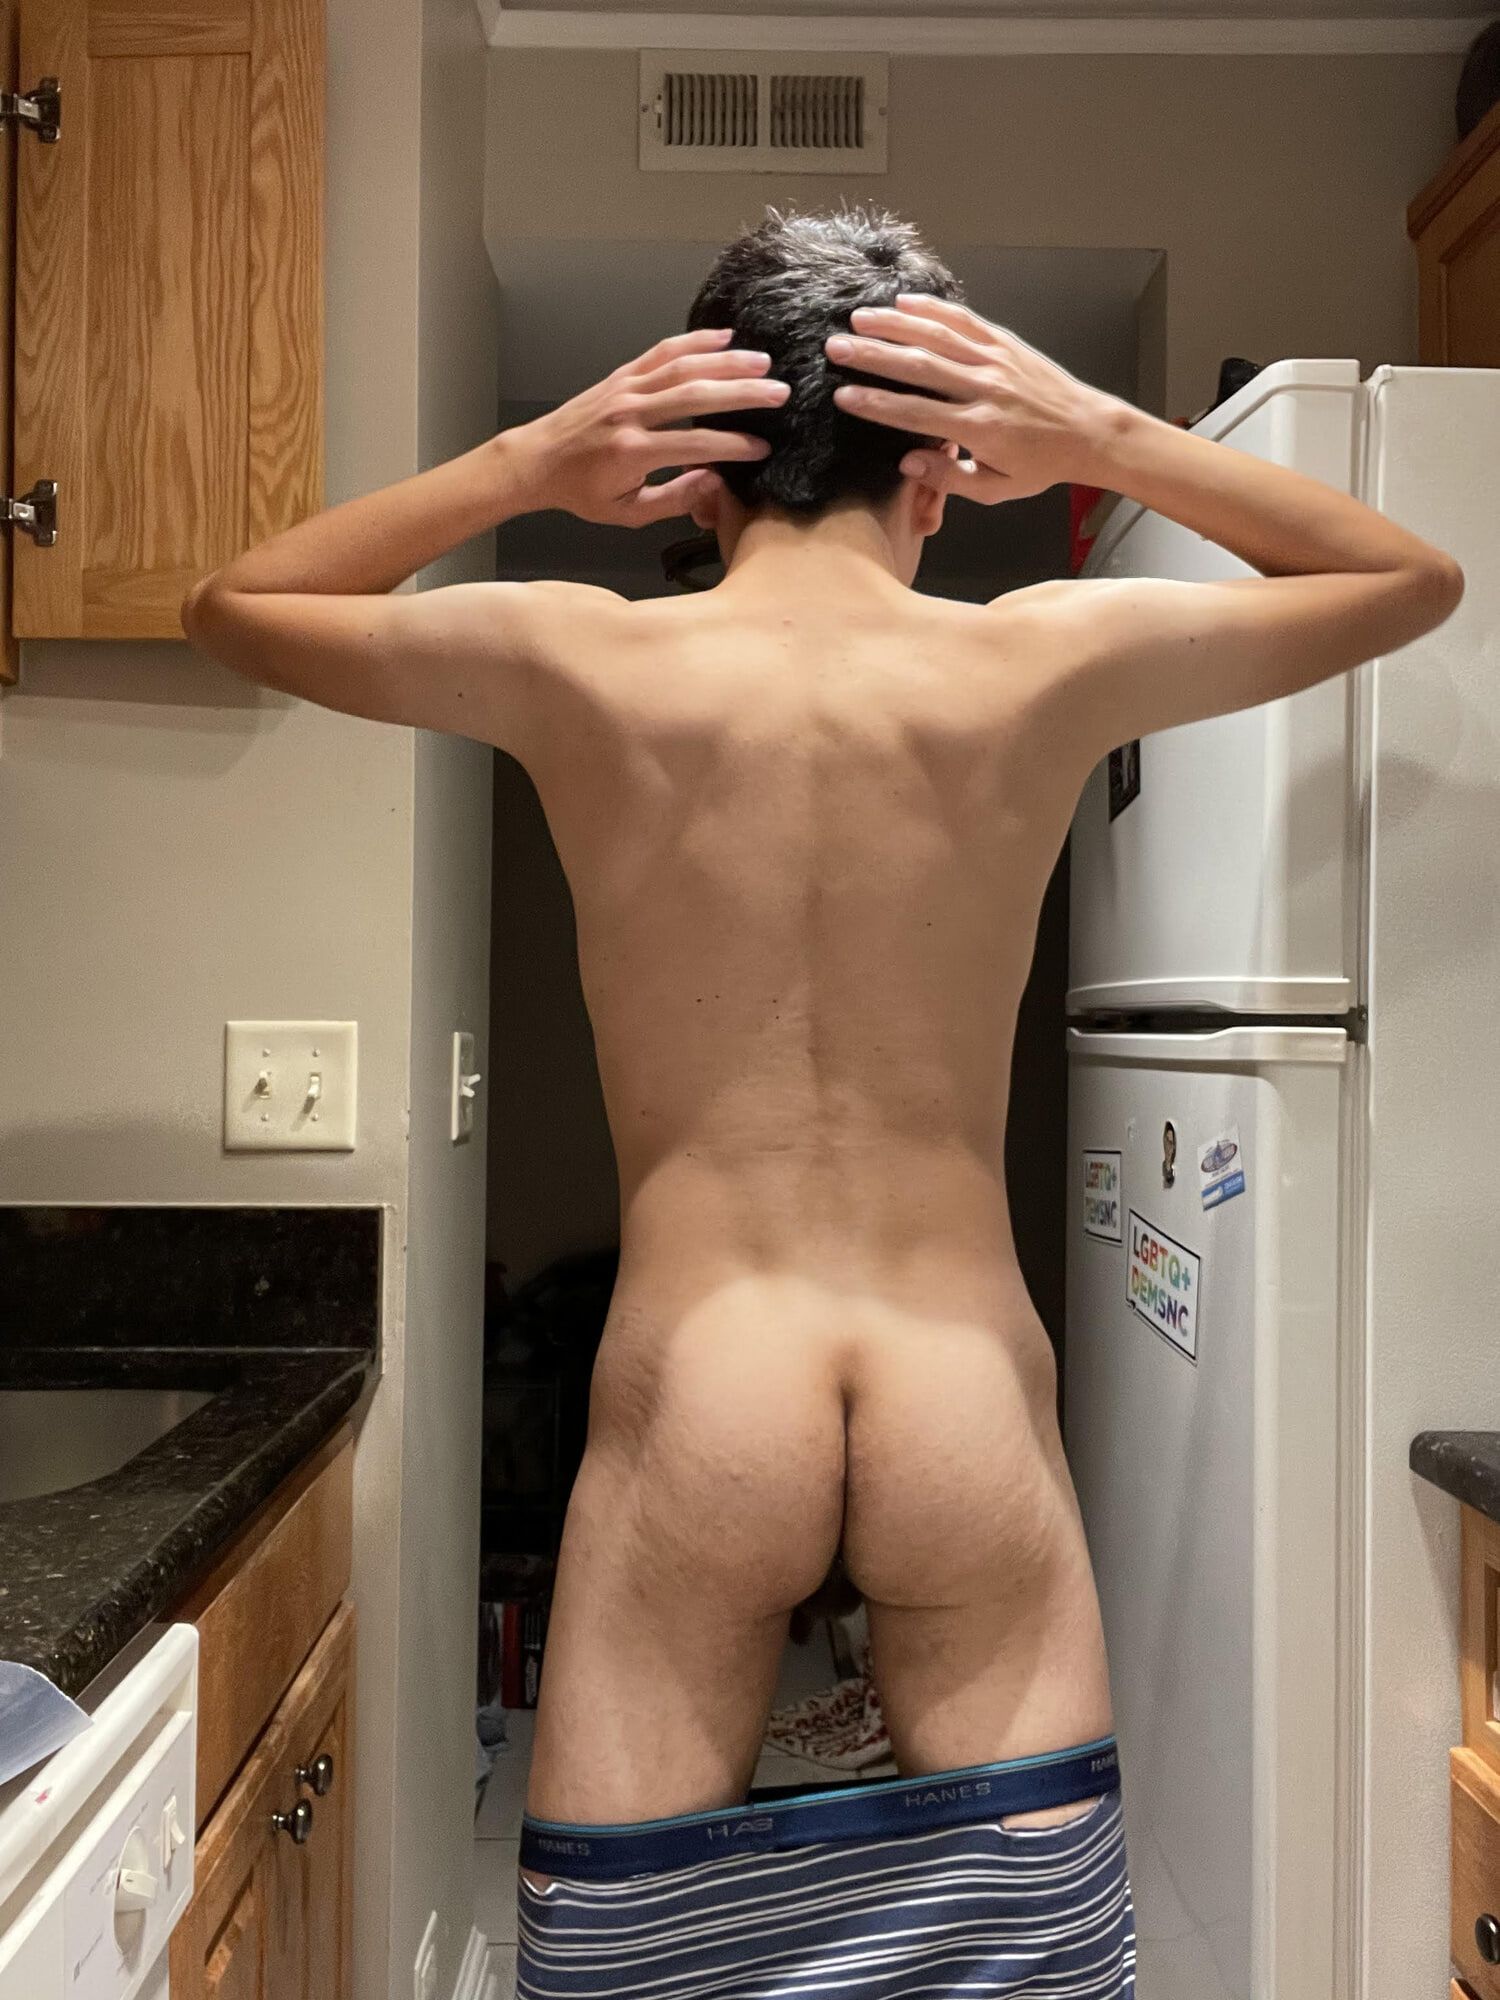 Butt and cock pics w face #9